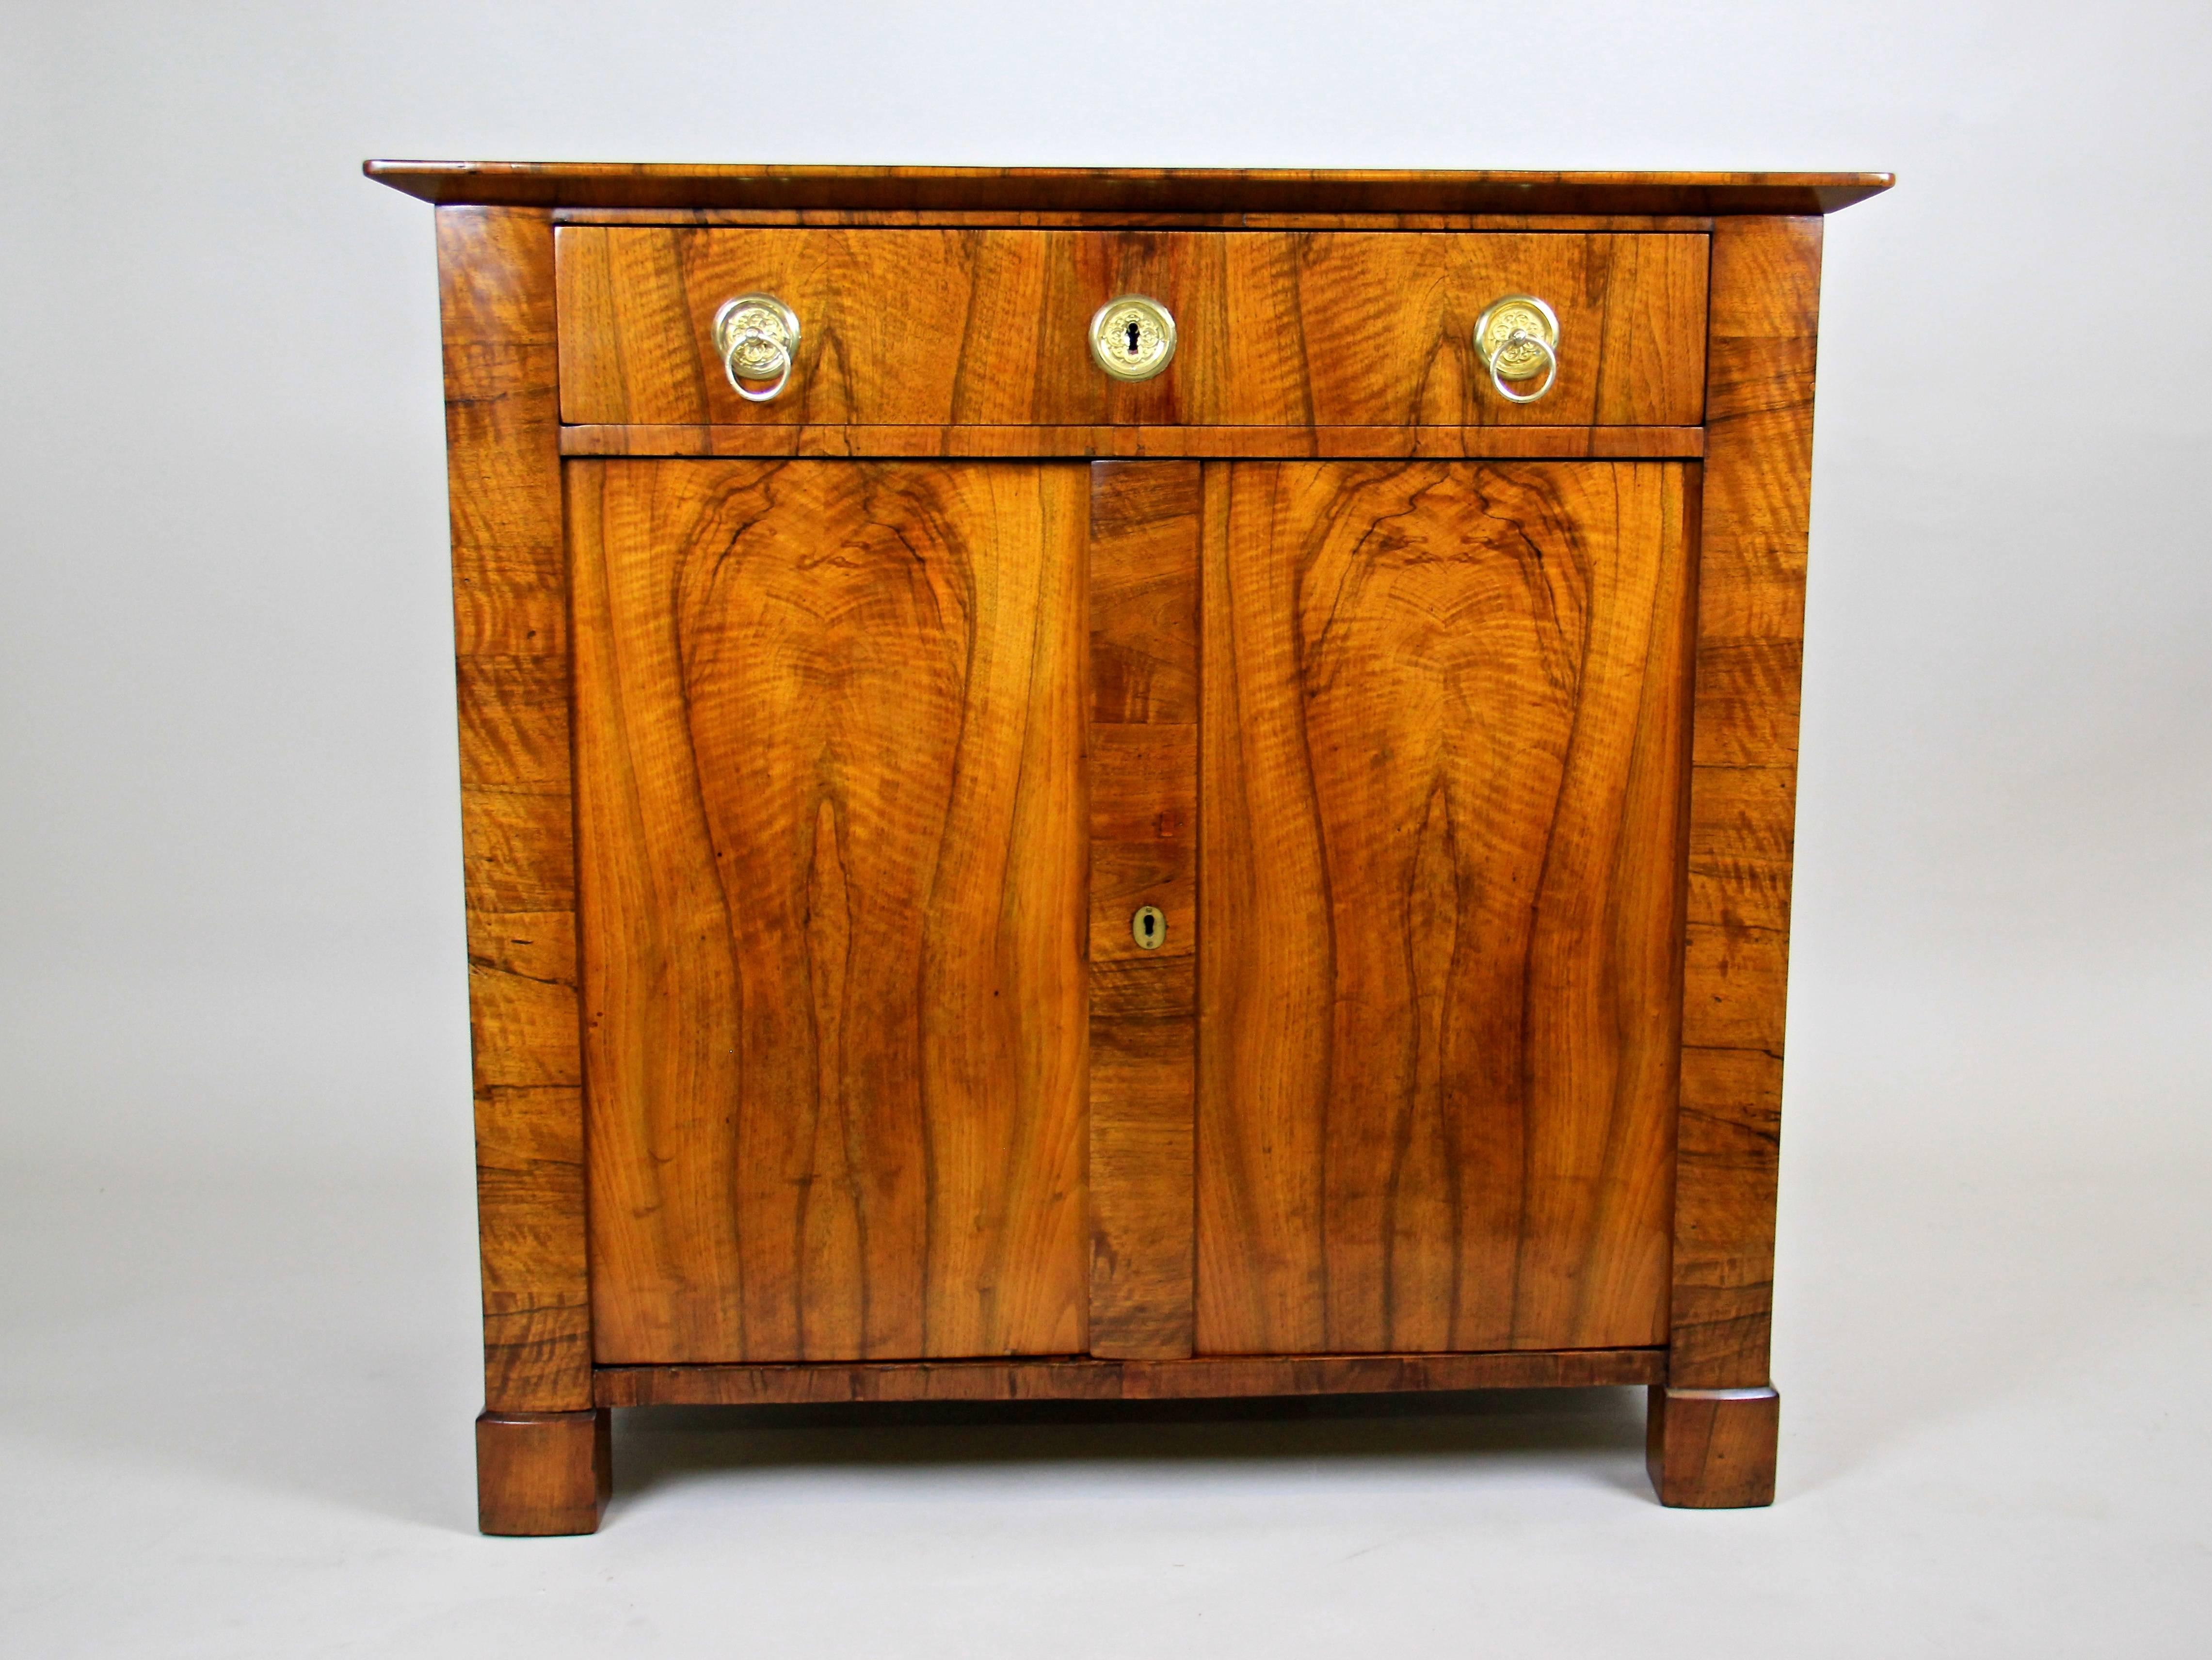 The dreamlike trumeau chest from the Biedermeier period, circa 1830 blends well in any context due to its simple yet charming minimalistic appearance. Constructed from spruce wood and veneered with finest Nutwood for a wonderful allure, this commode